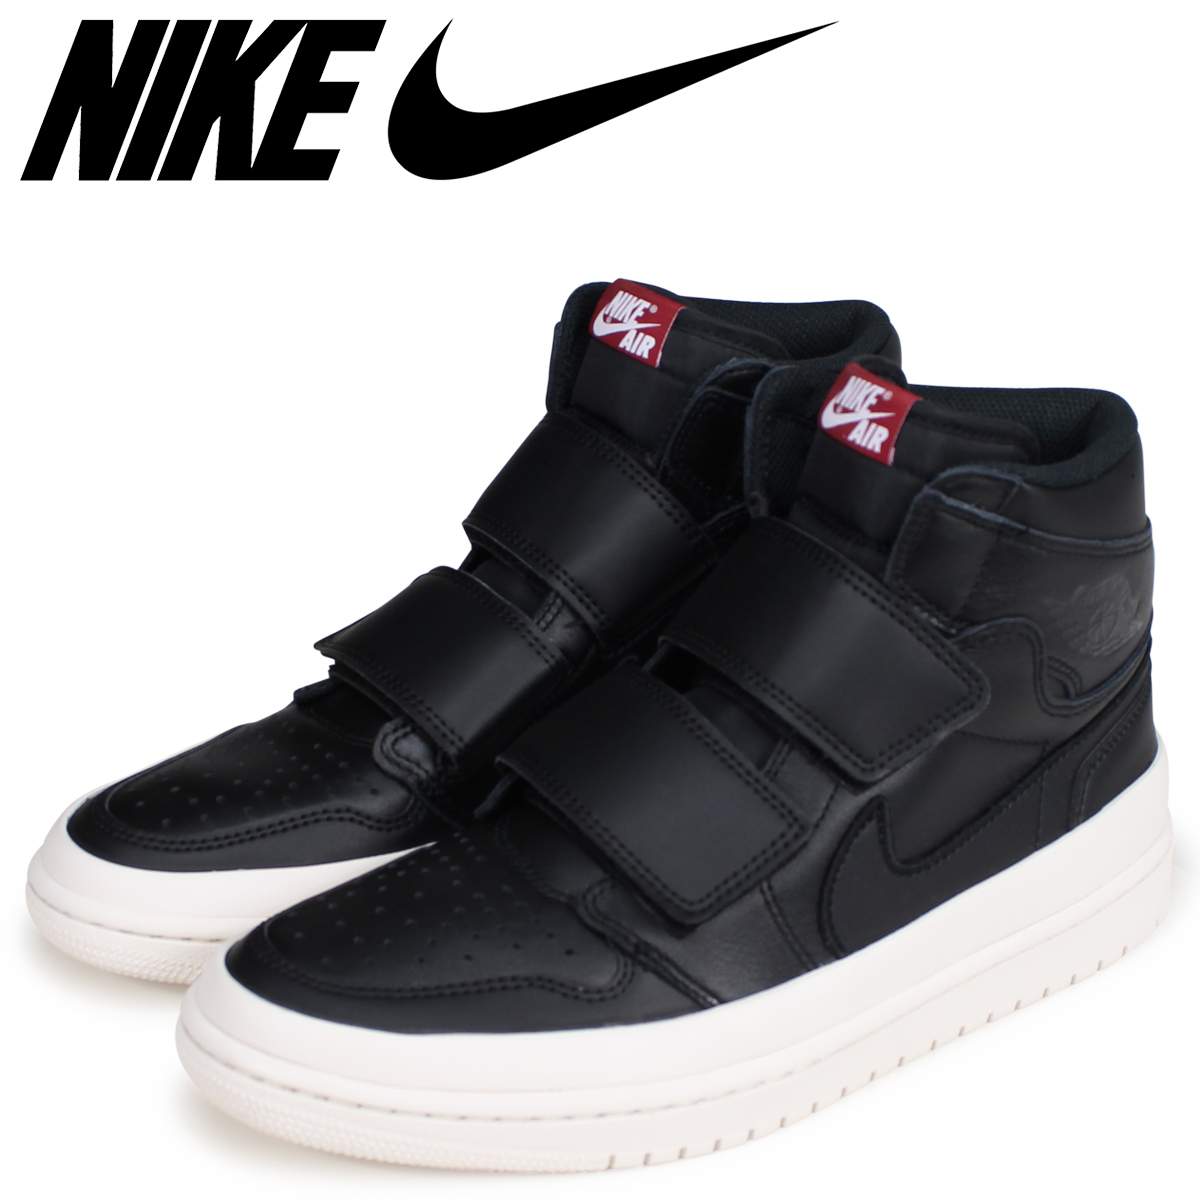 nike products online